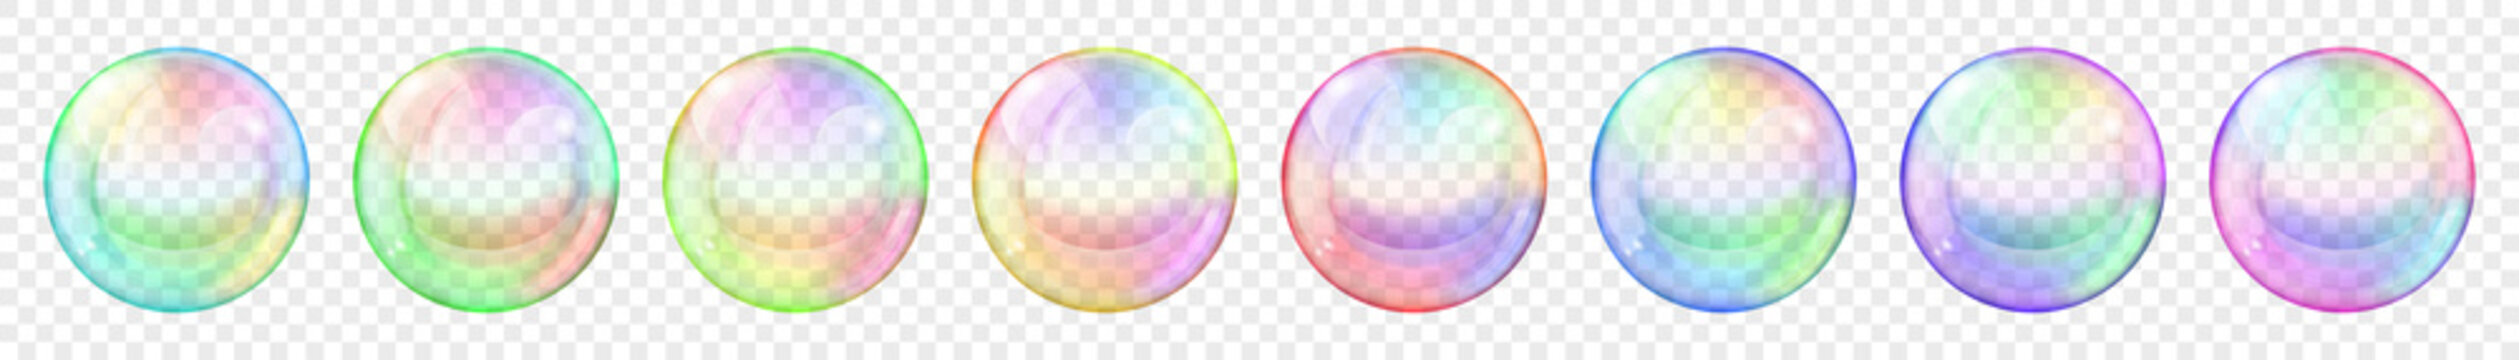 Set of translucent colored soap bubbles on transparent background. Transparency only in vector format